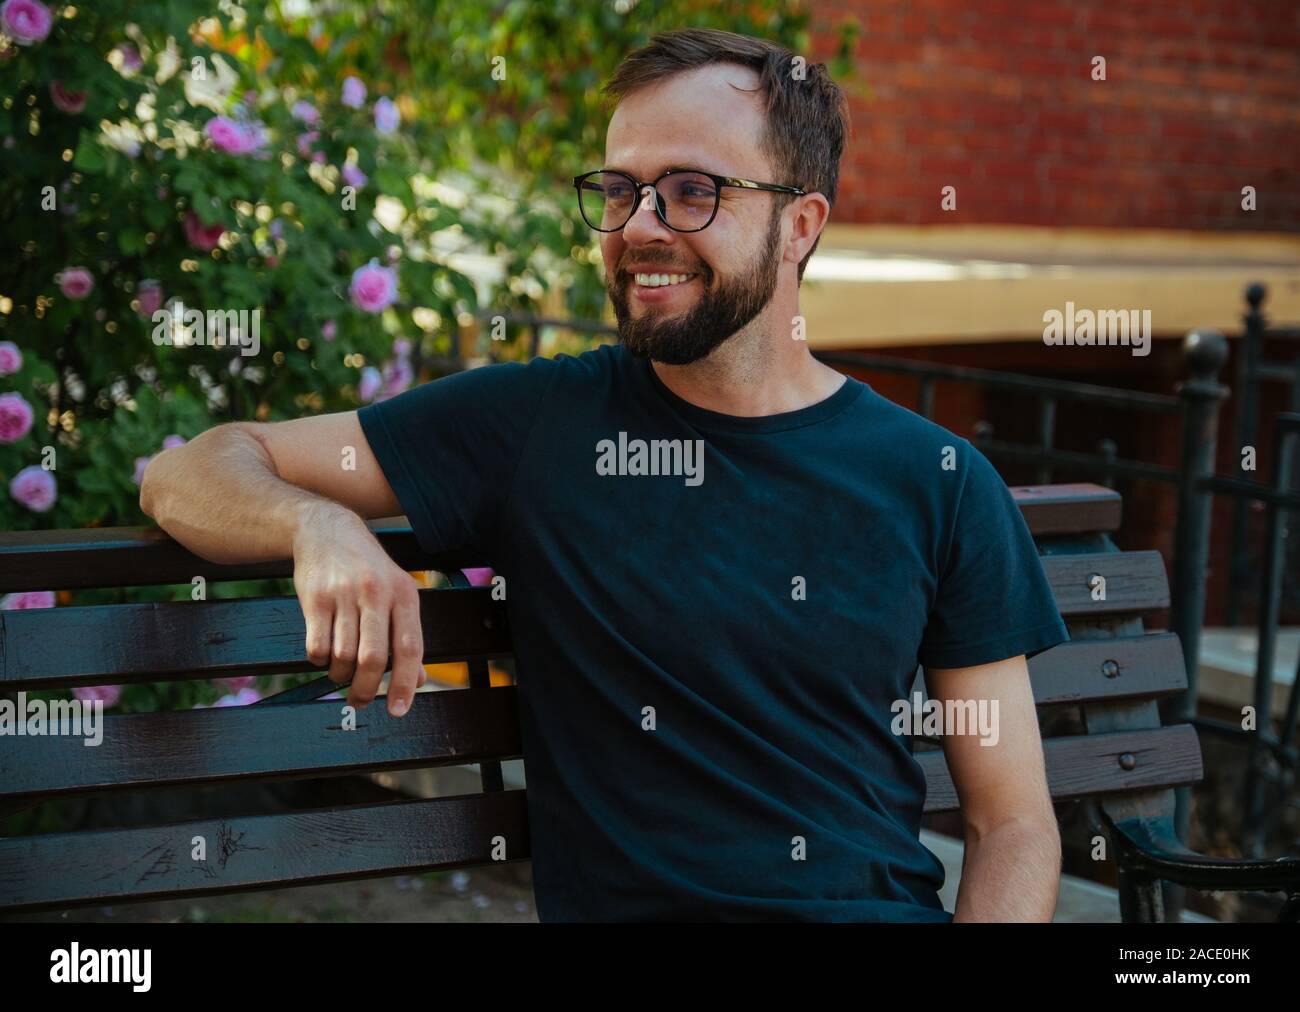 Man in black t-shirt, beard an glasses on the bench in summer city Stock Photo